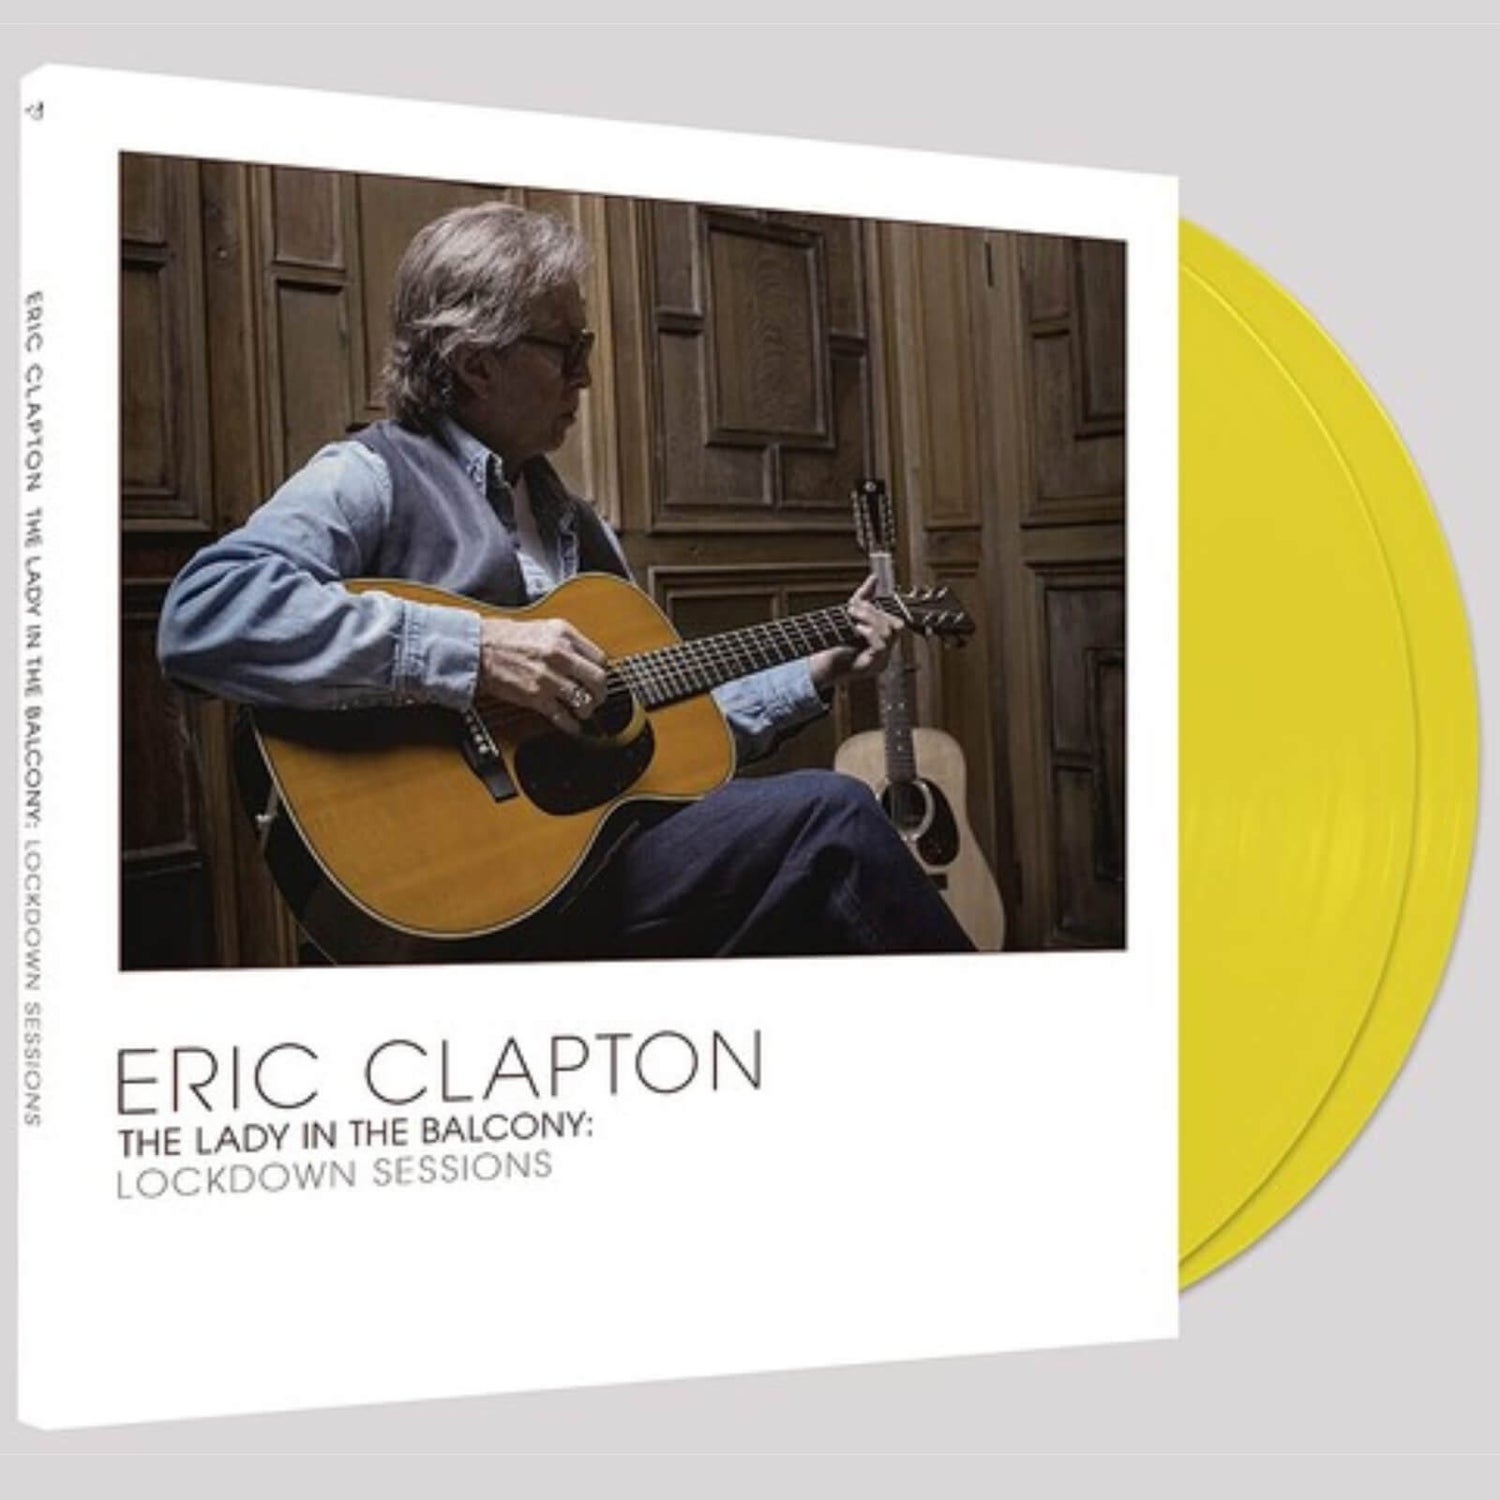 Eric Clapton - The Lady In The Balcony: Lockdown Sessions Vinyl (Yellow)